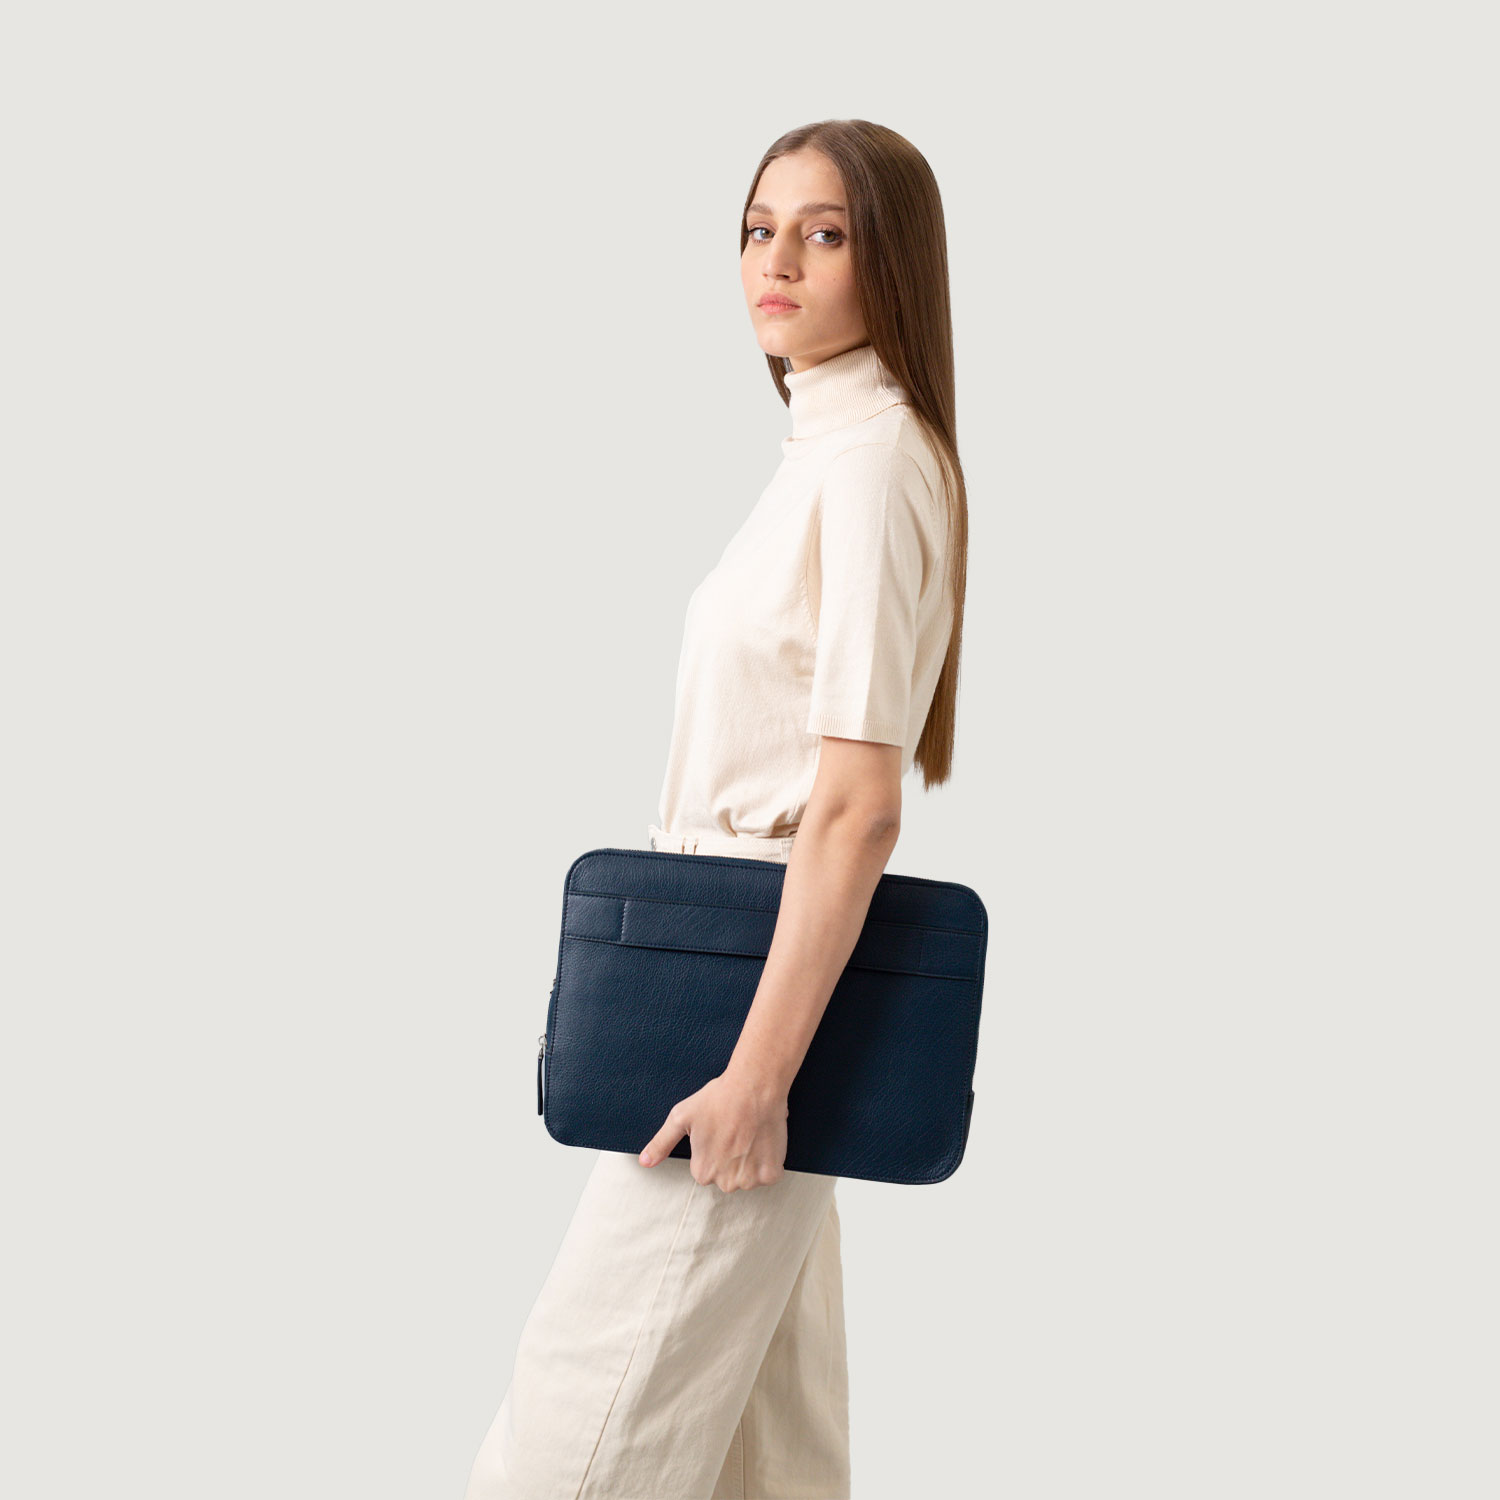 The Baxter Midnight Blue Leather Laptop Sleeve